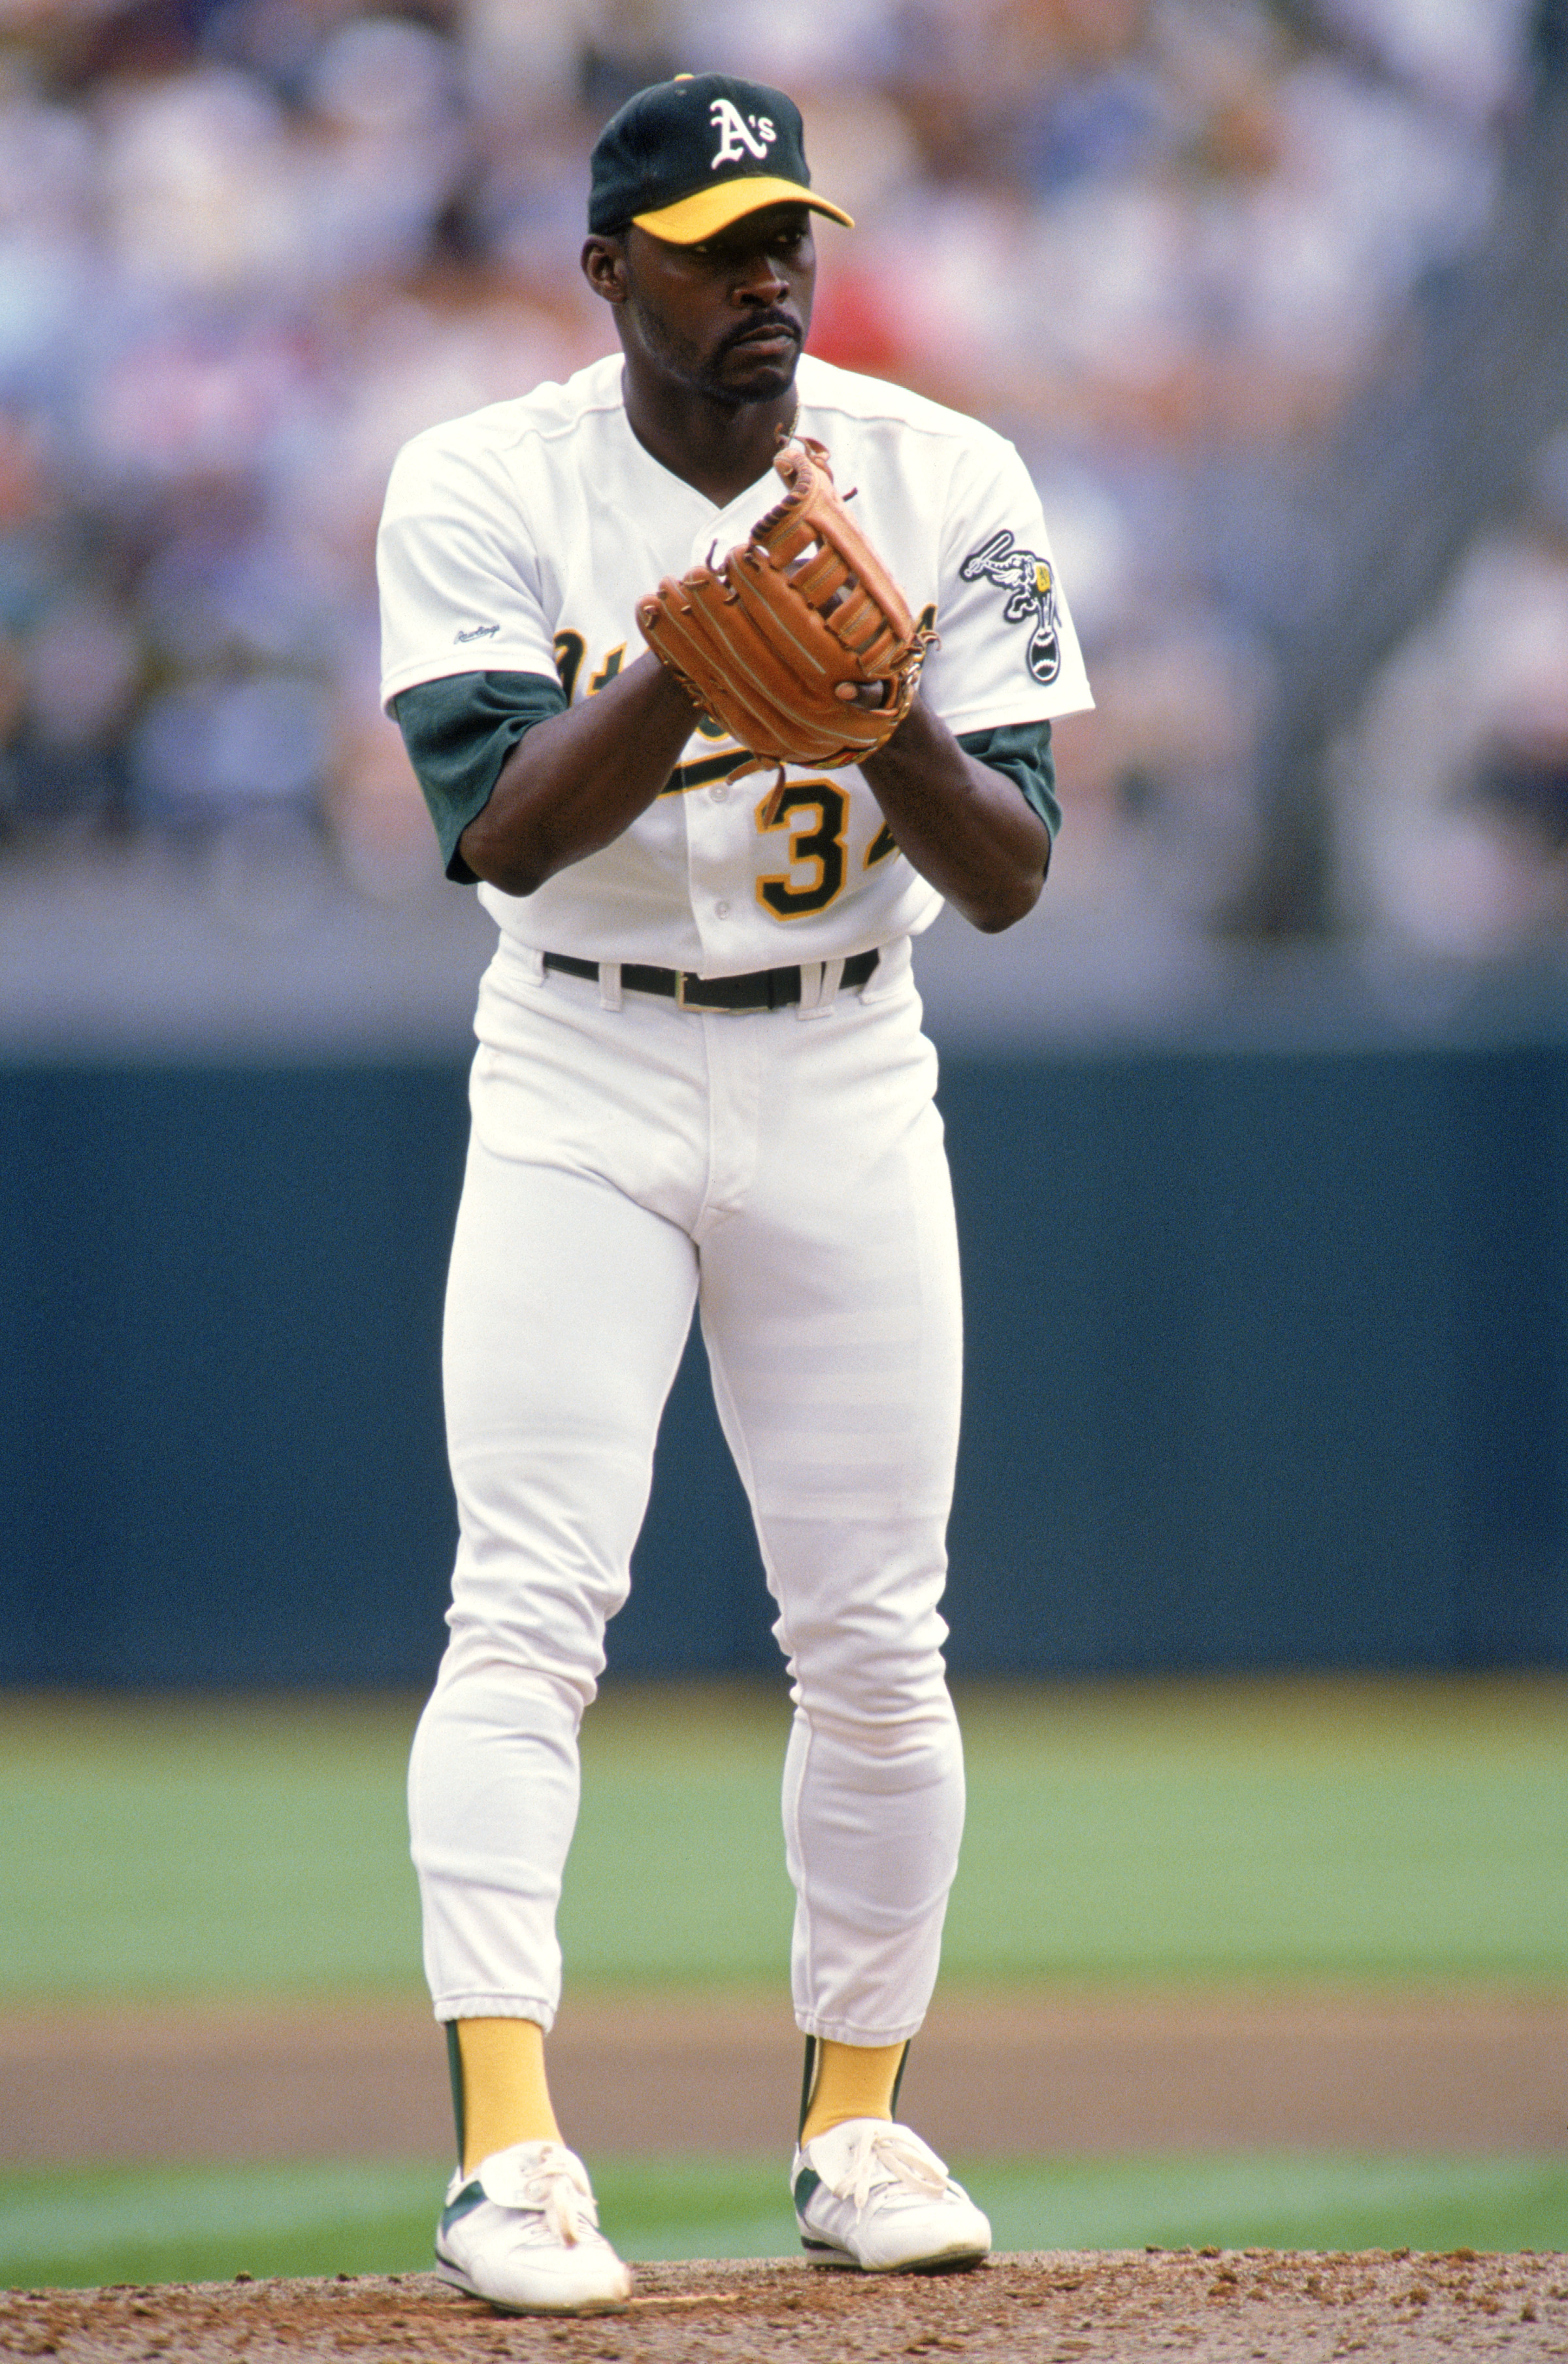 The Top 25 Oakland Athletics of All Time